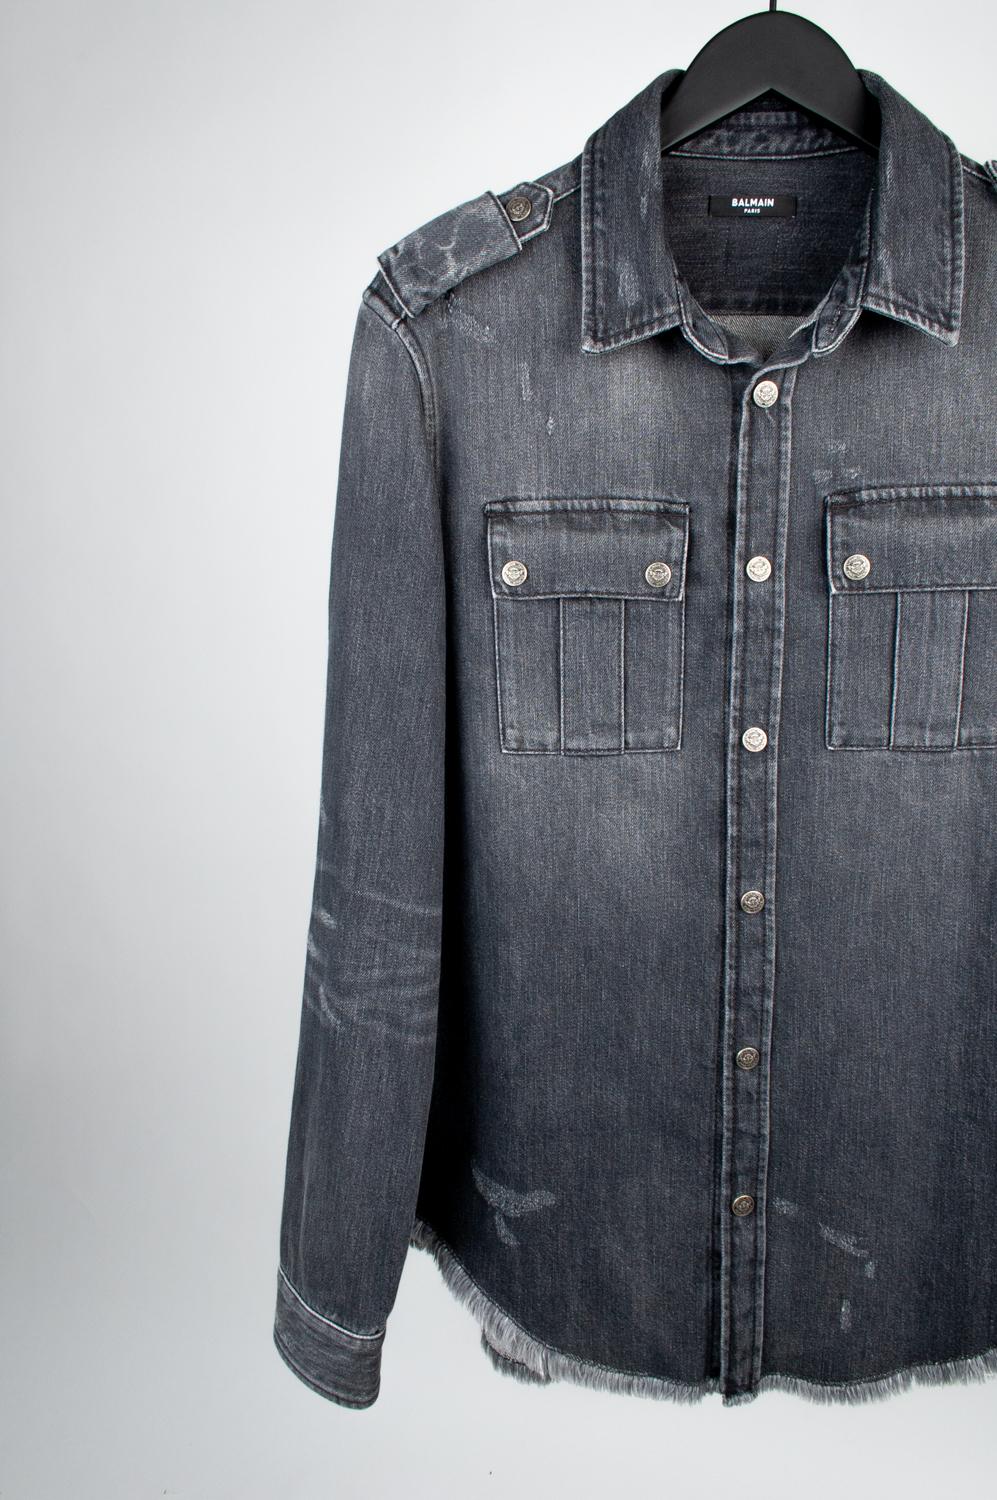 100% genuine Balmain Paris Distressed Denim Overshirt, S603
Color: Grey
(An actual color may a bit vary due to individual computer screen interpretation)
Material: 100% heavy cotton
Tag size: 40 runs Medium
This jacket is great quality item. Rate 9